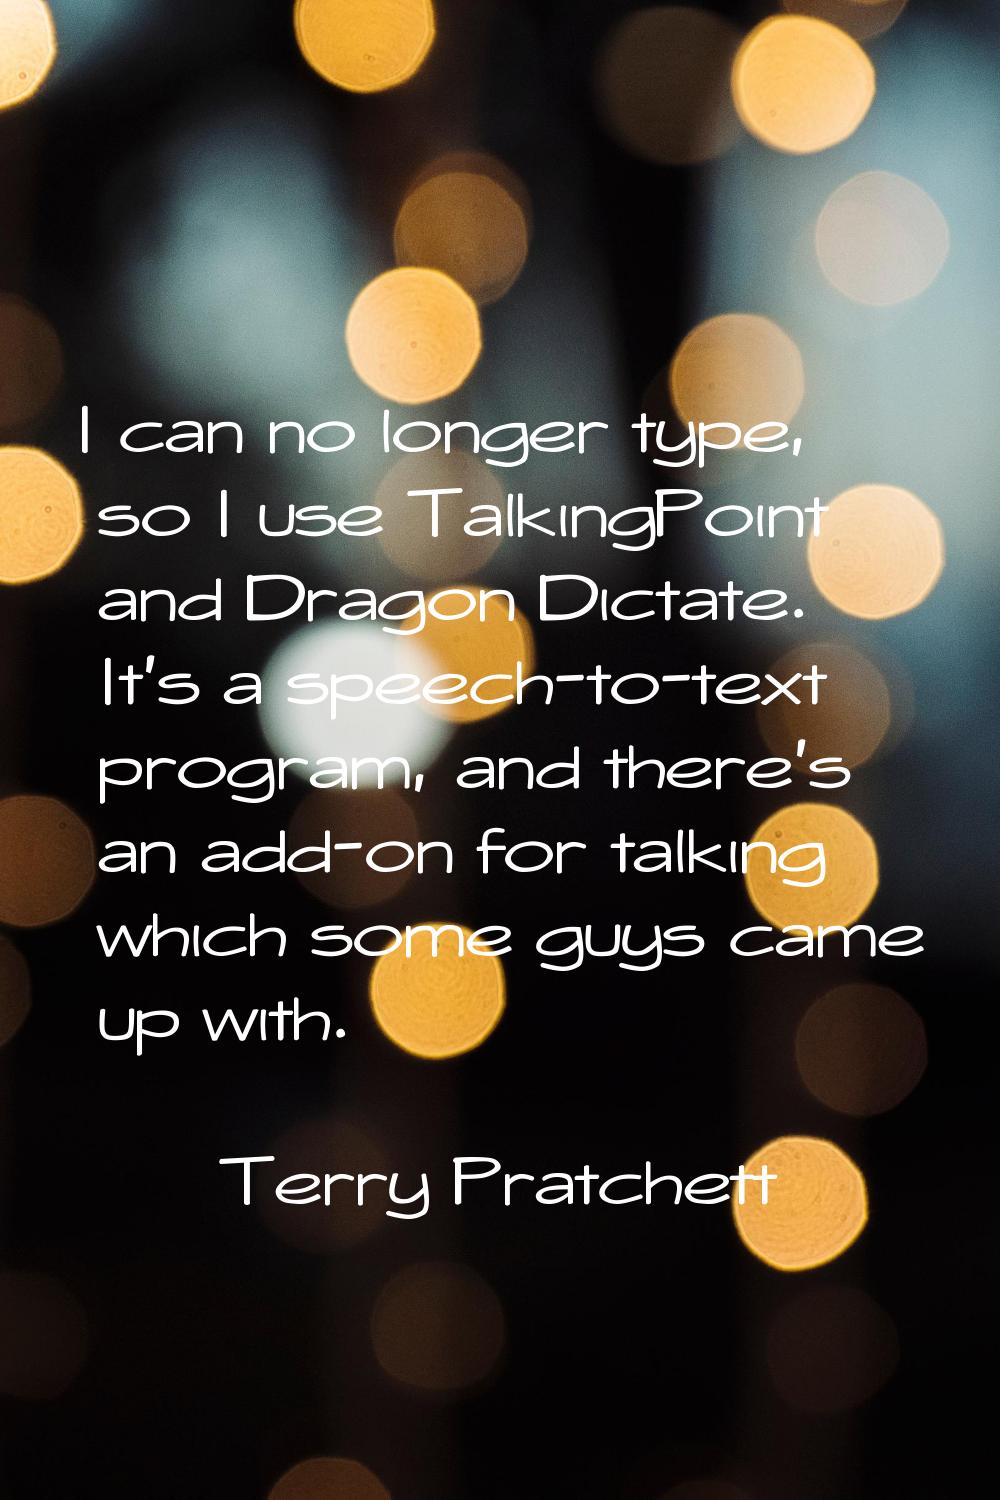 I can no longer type, so I use TalkingPoint and Dragon Dictate. It's a speech-to-text program, and 